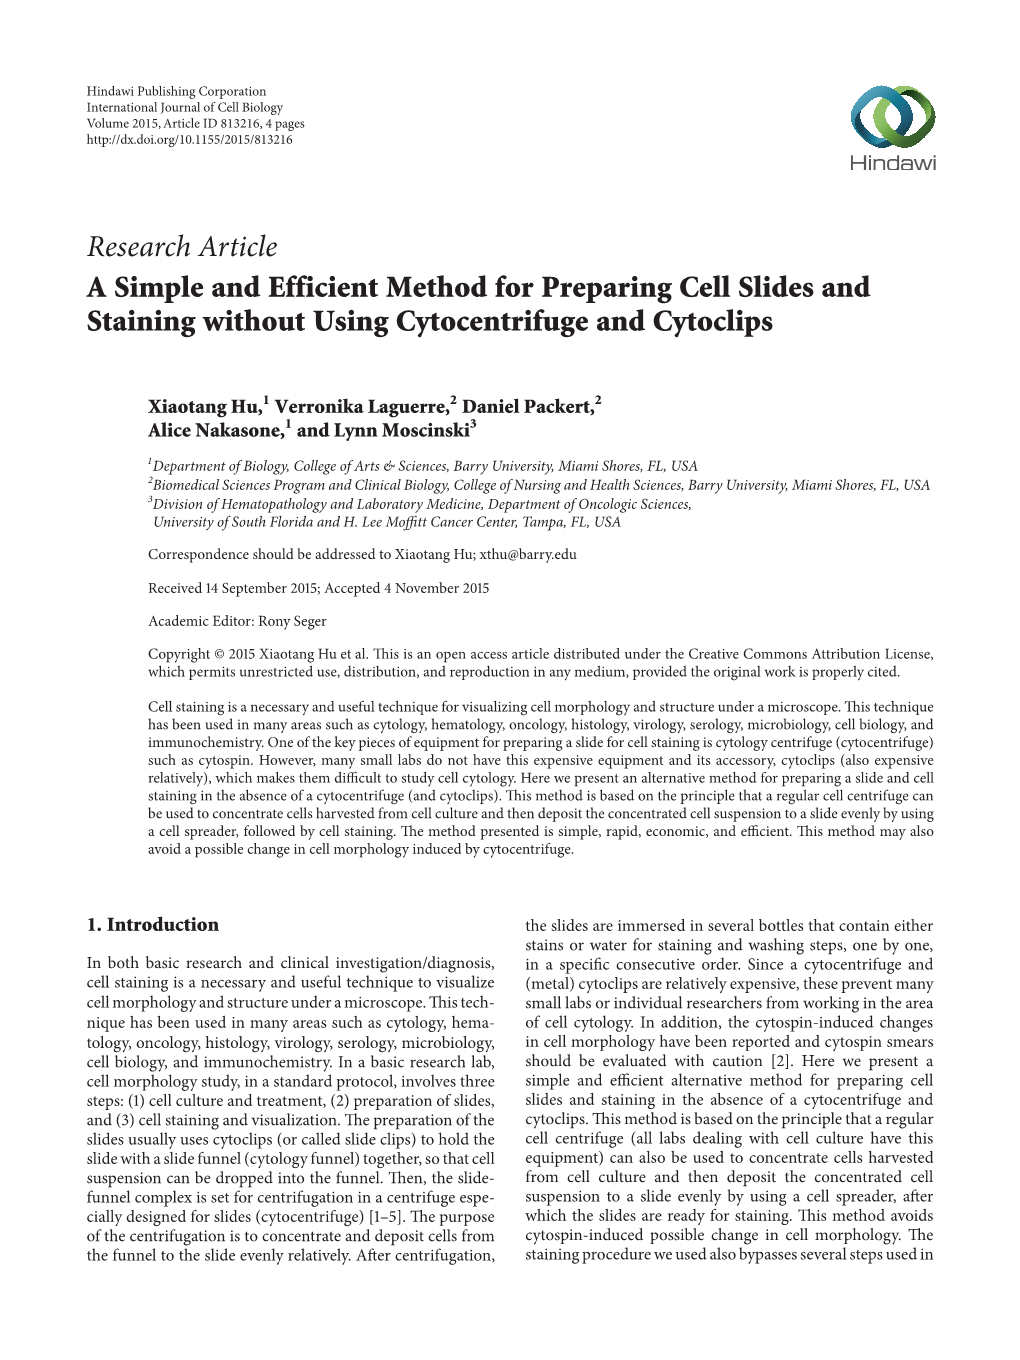 A Simple and Efficient Method for Preparing Cell Slides and Staining Without Using Cytocentrifuge and Cytoclips